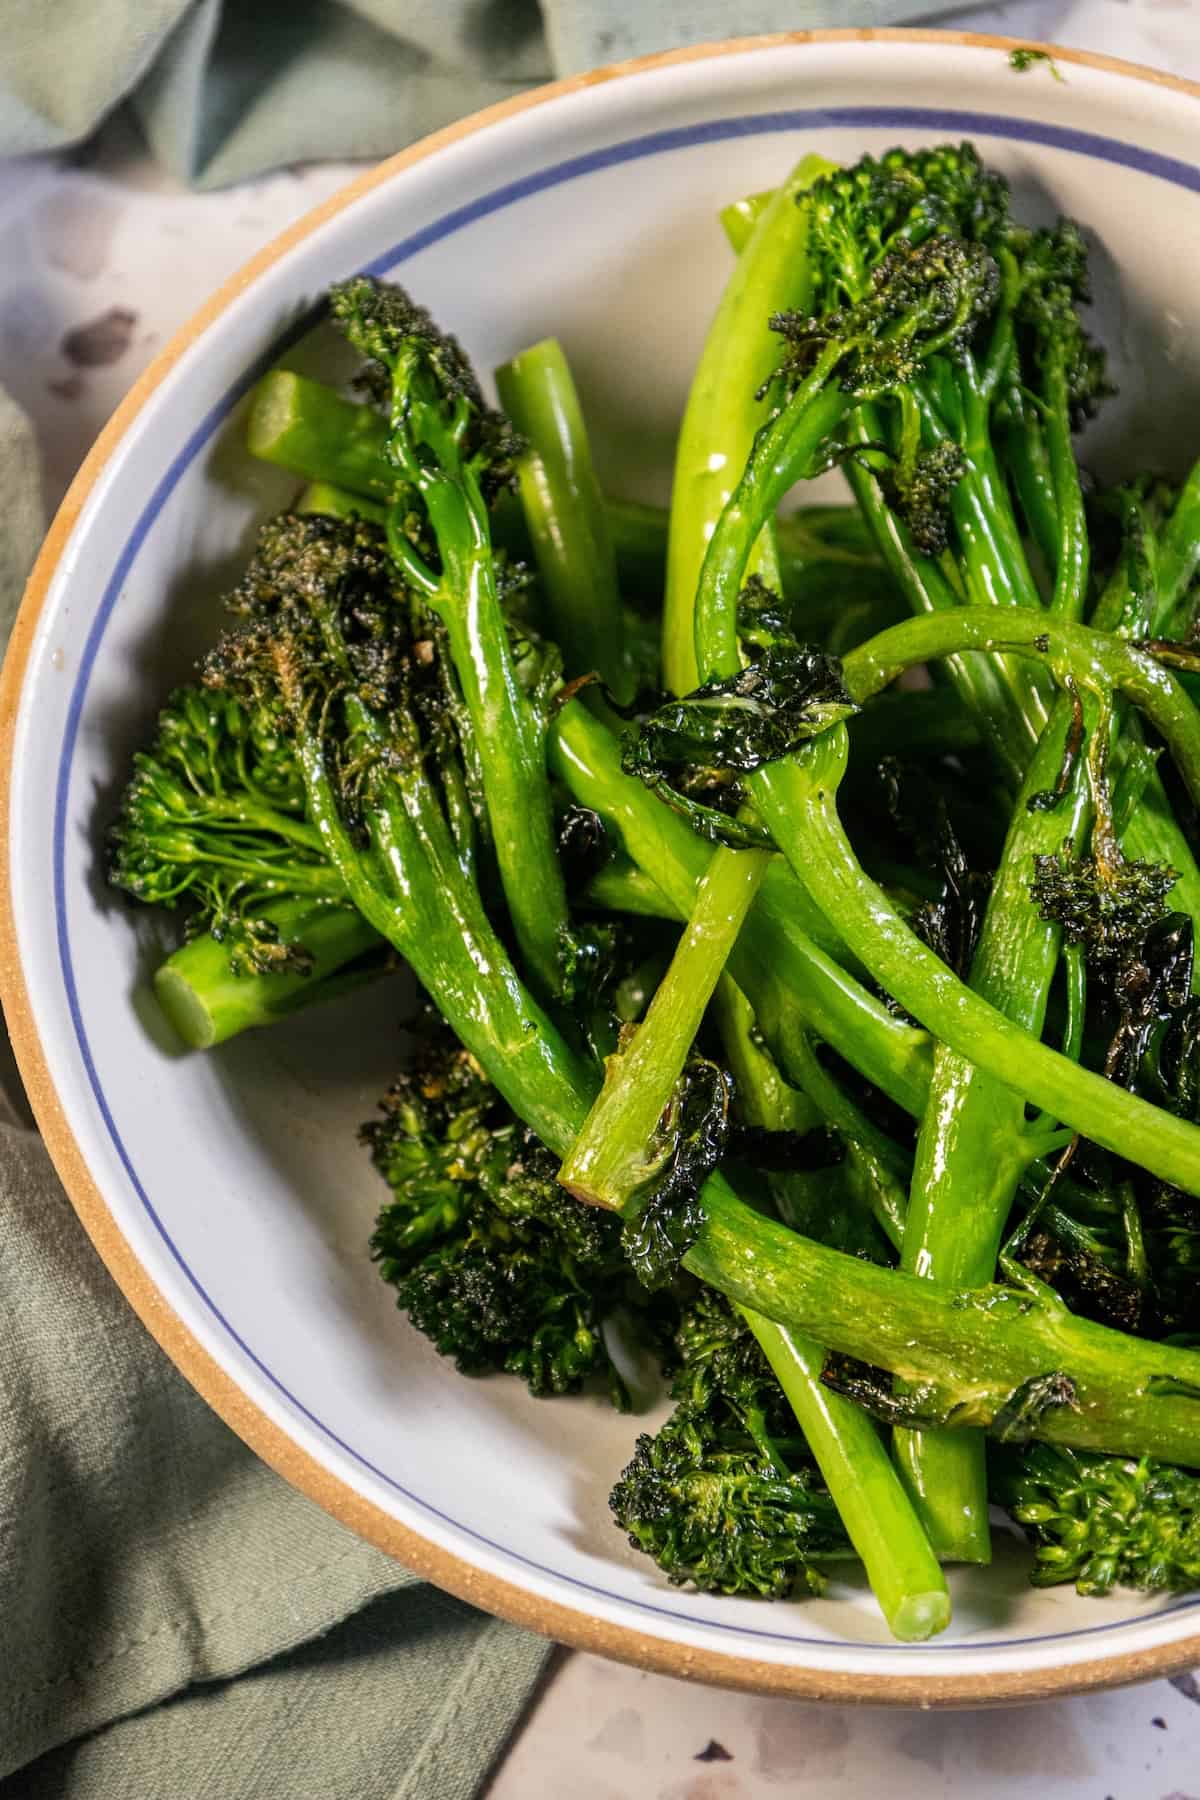 A bowl of sauteed broccolini on a table with a napkin.